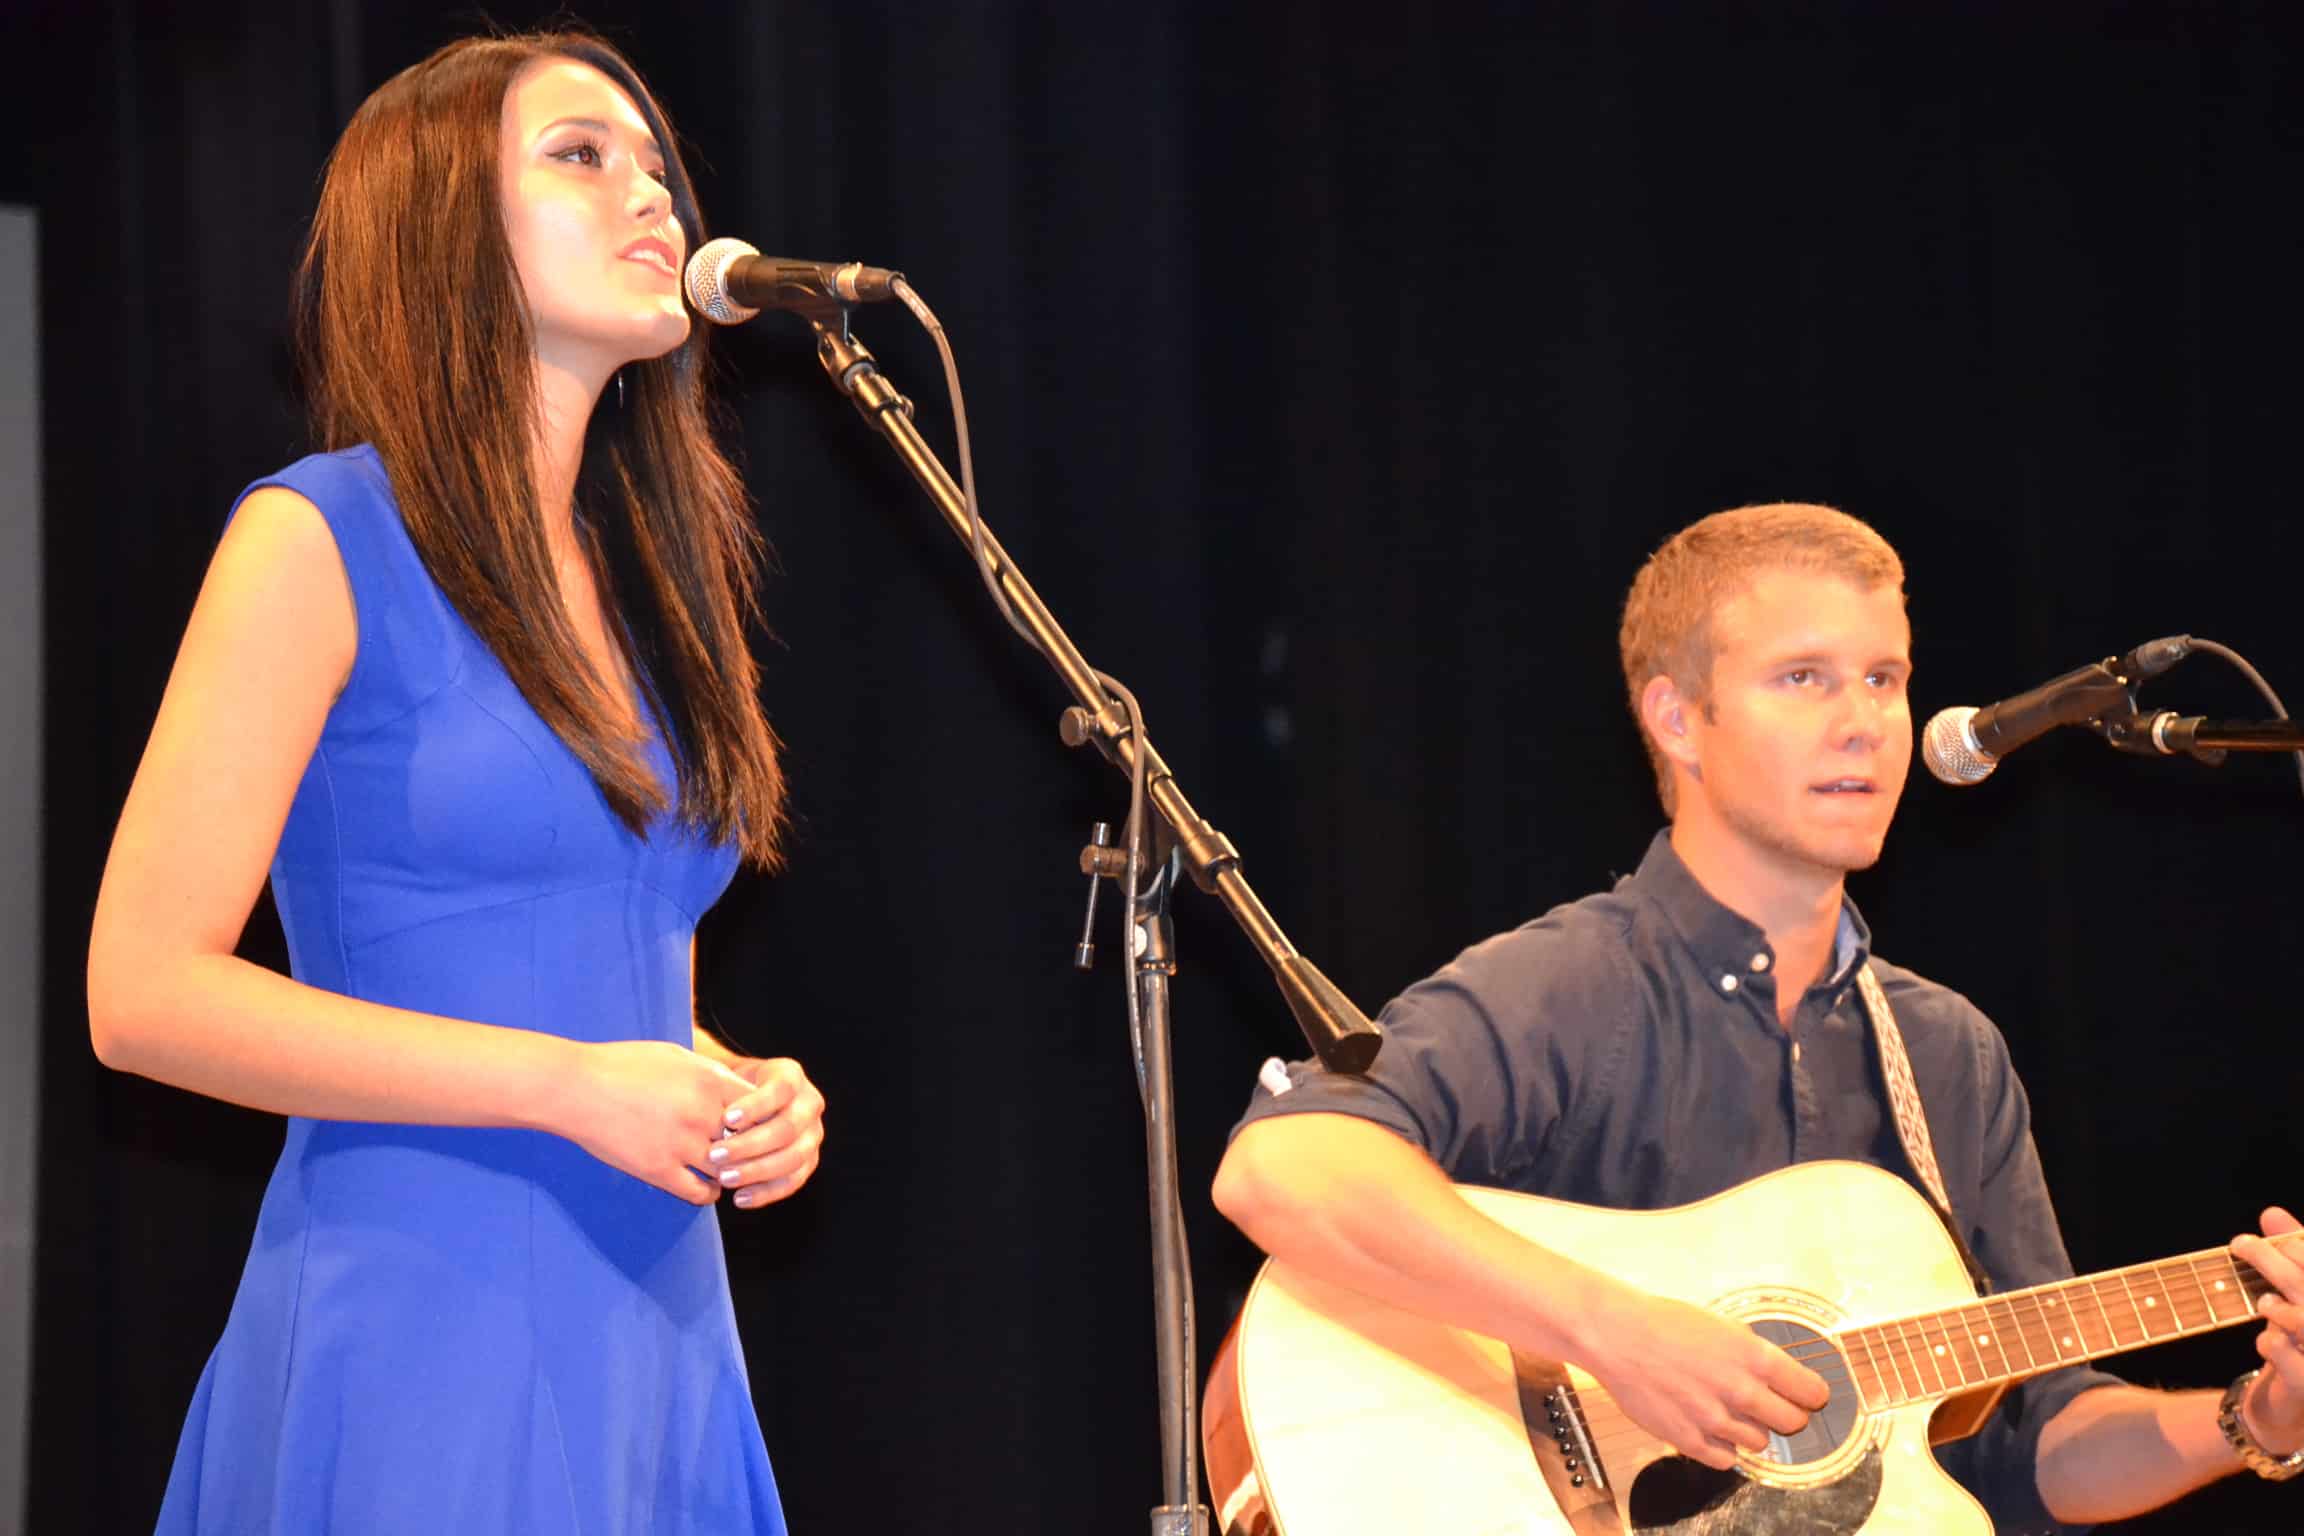 Christal Potter and Christian Dilbert perform the song "Shoulders" at NGU's talent show.